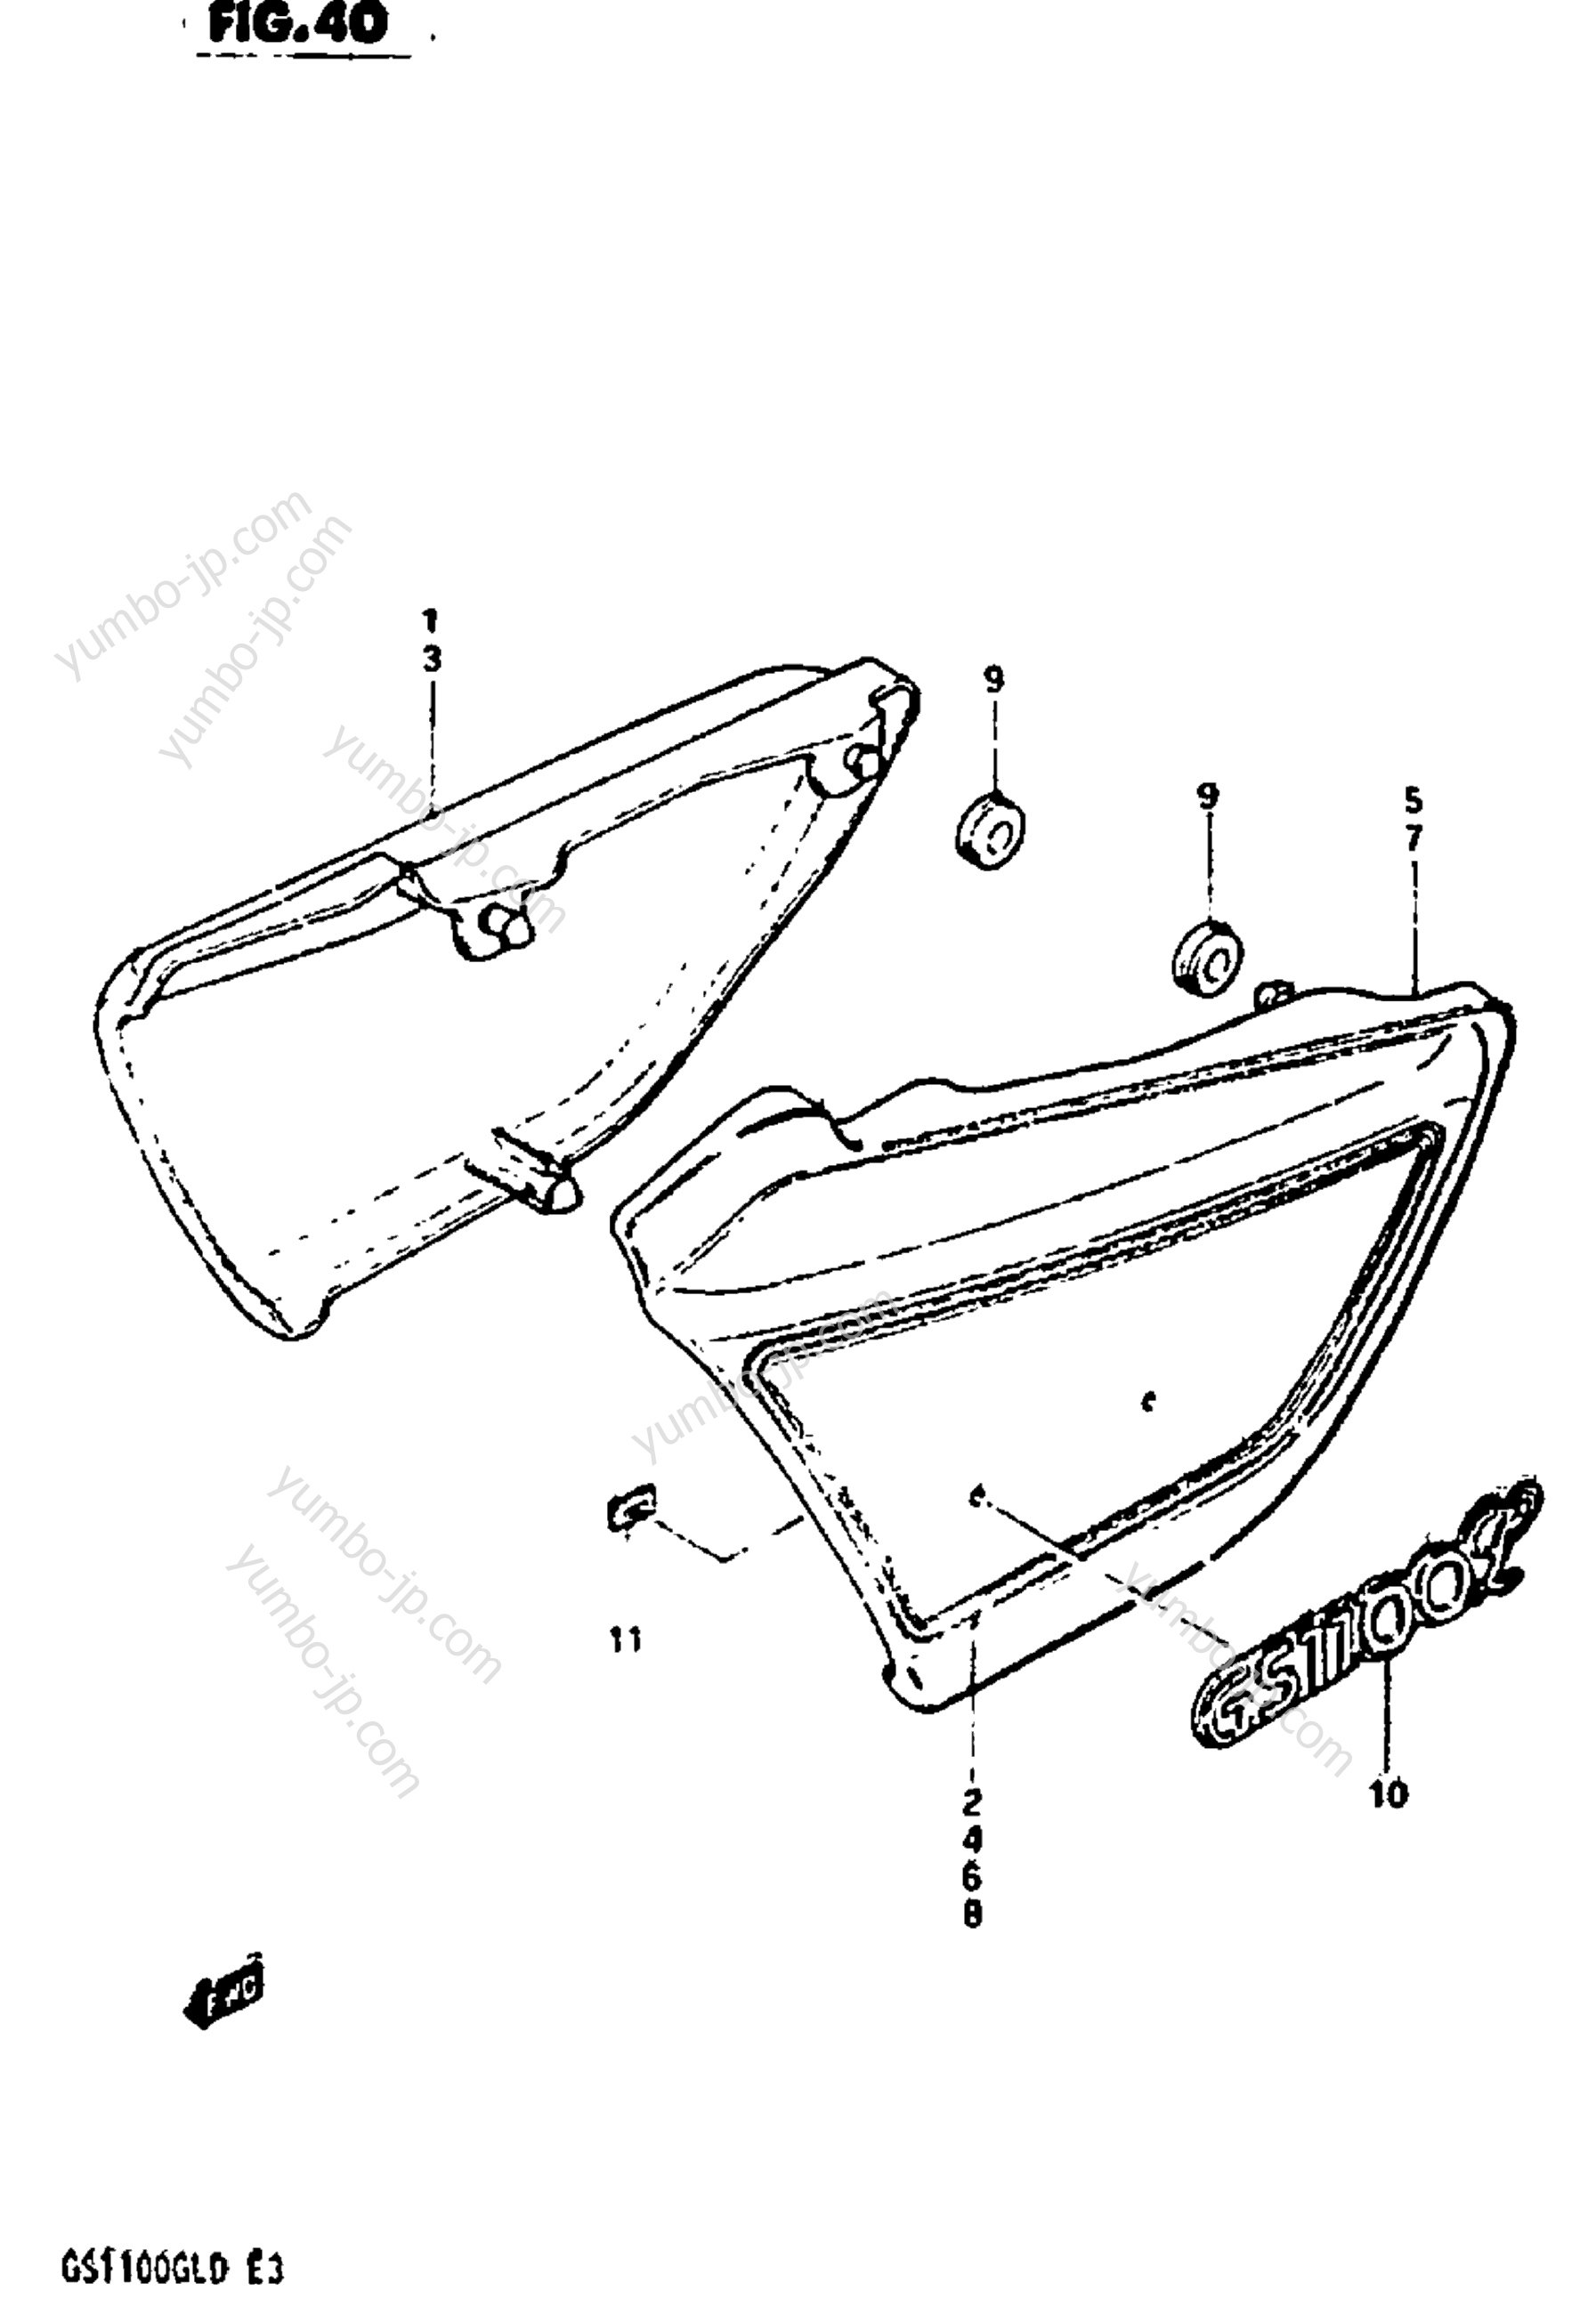 FRAME COVER (MODEL Z) for motorcycles SUZUKI GS1100GL 1982 year